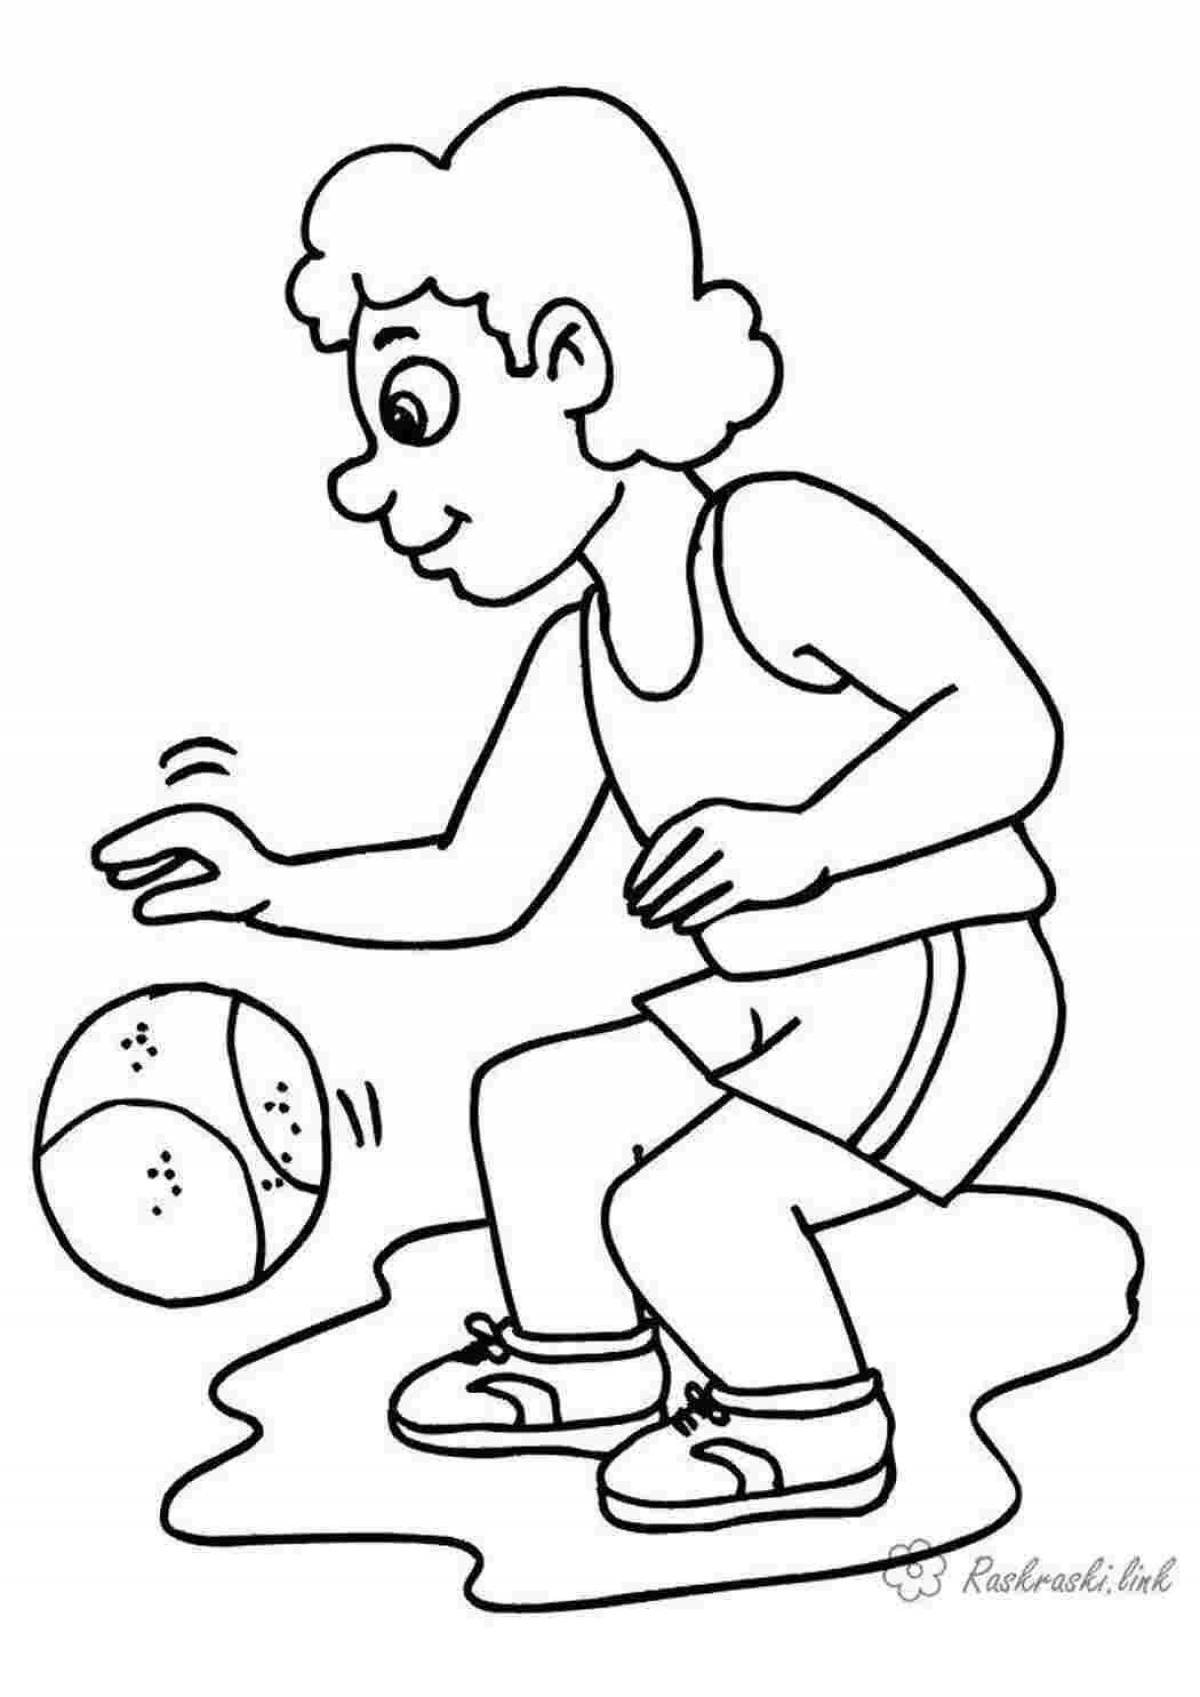 Creative Health Day coloring page